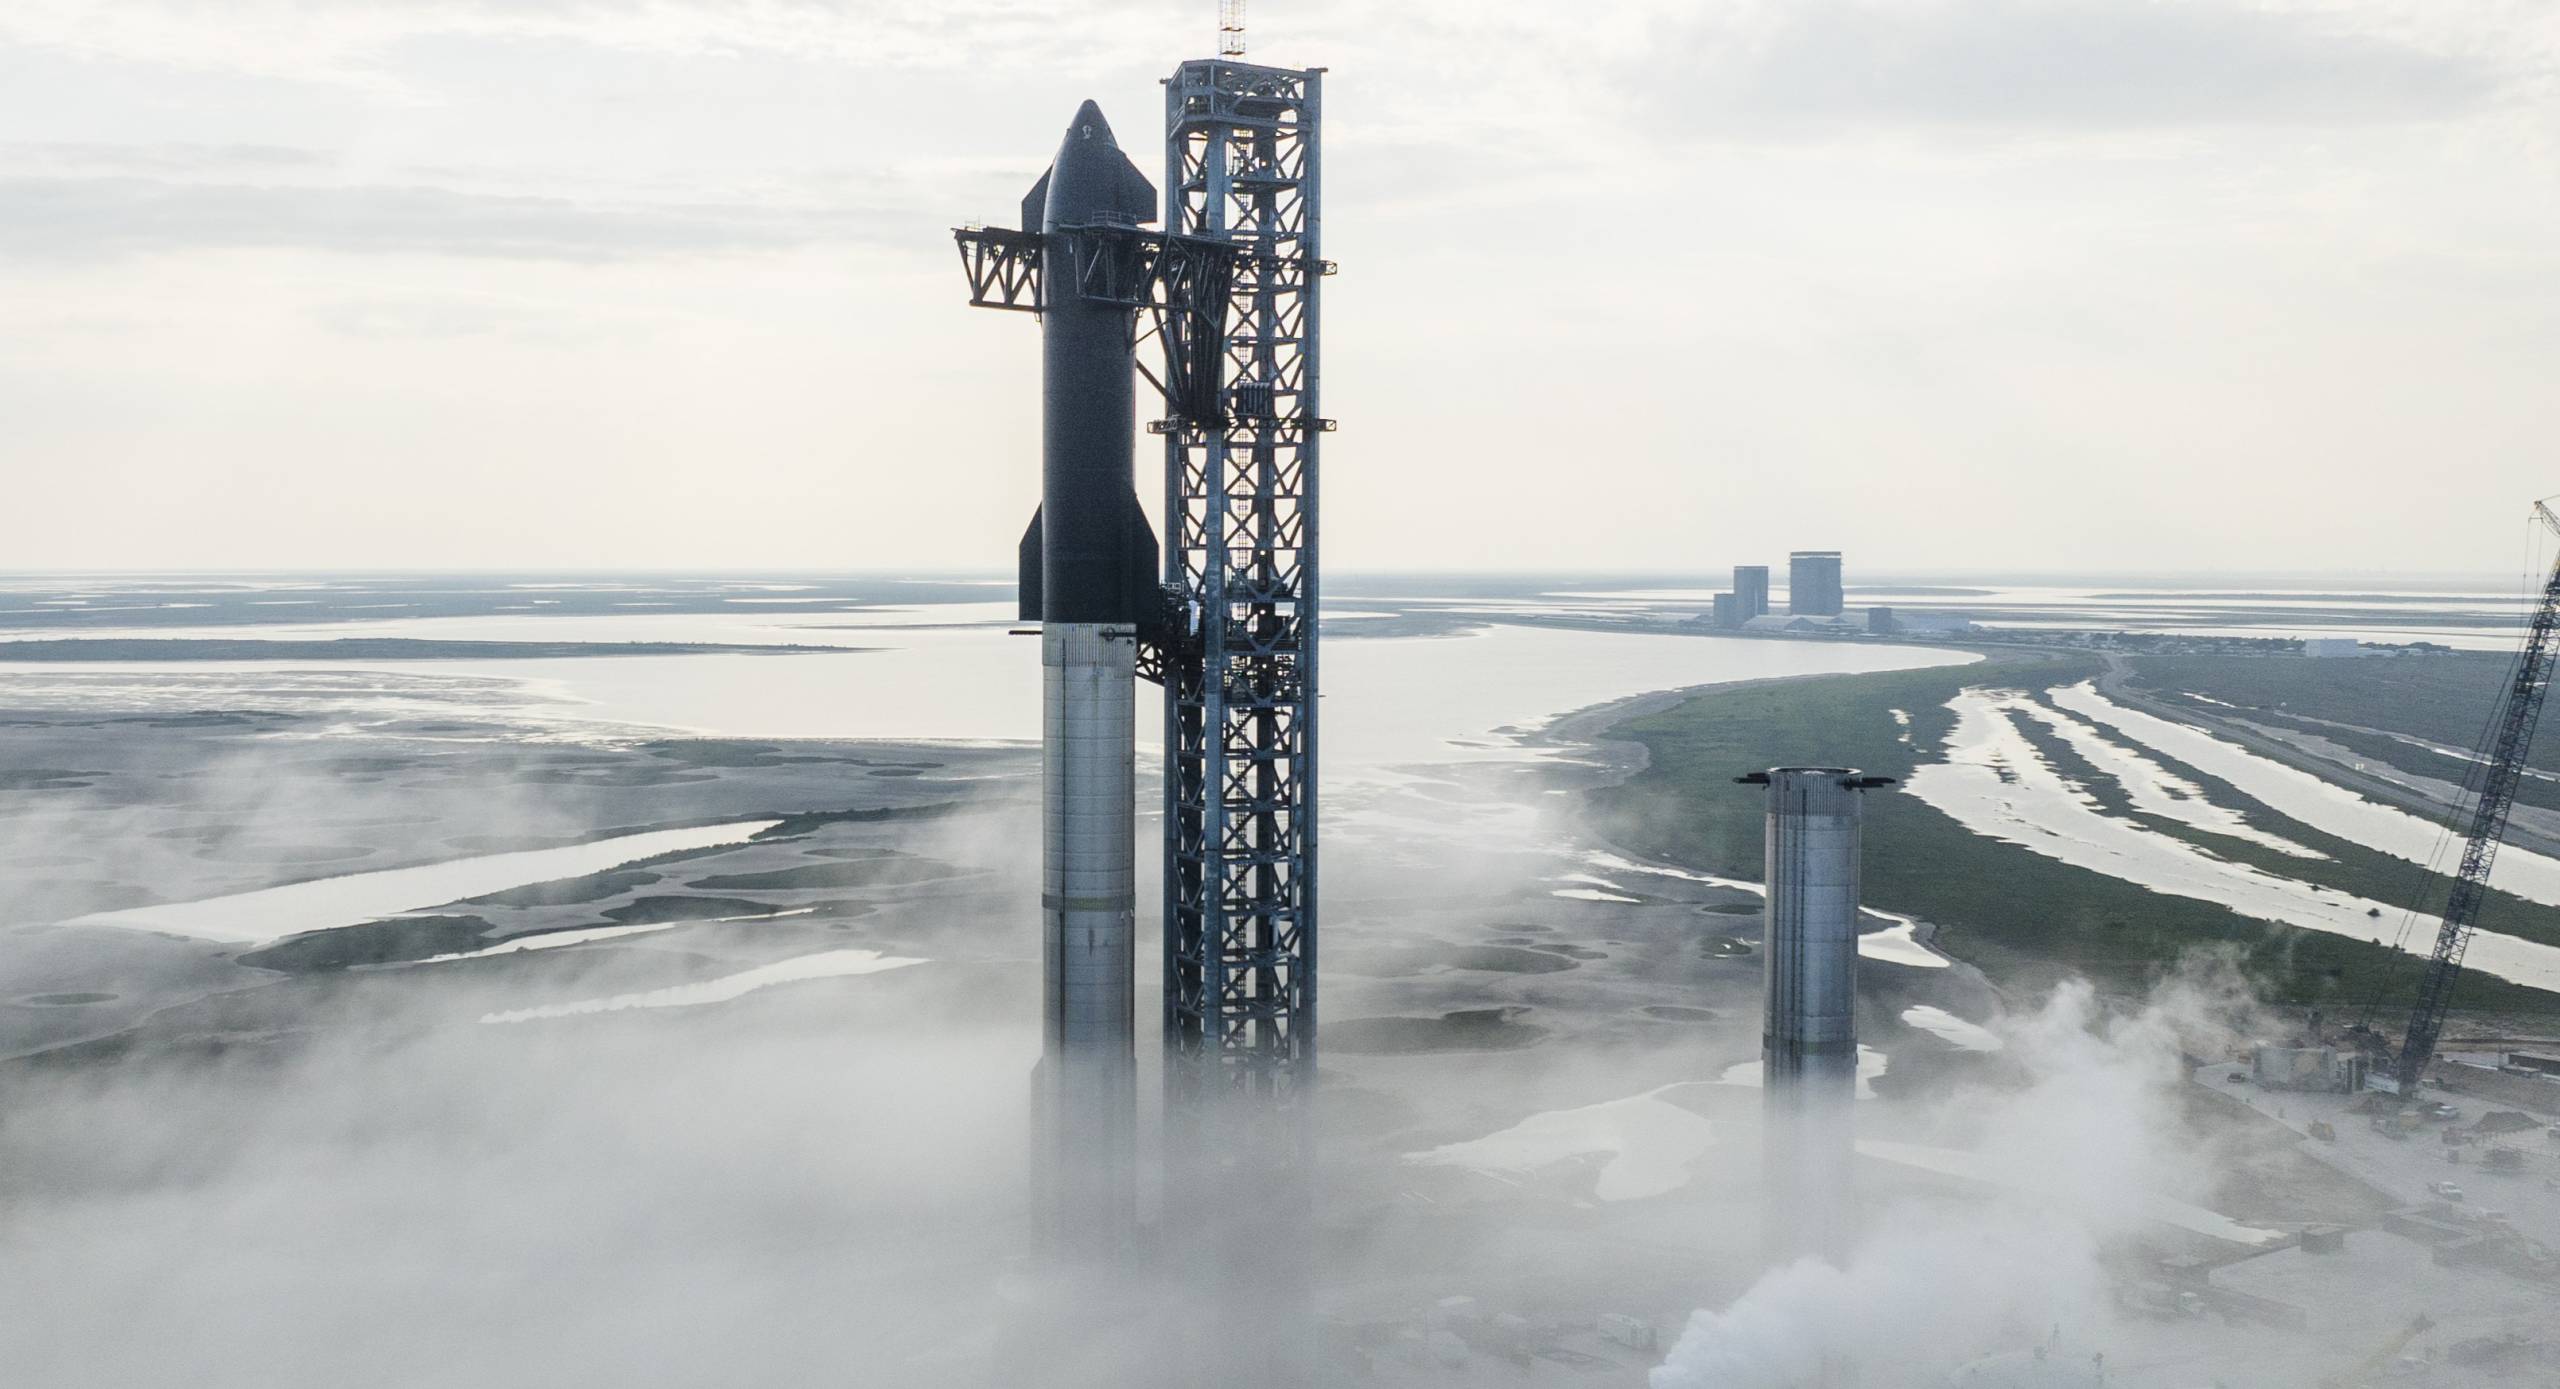 SpaceX Starship launch delayed in the future, Elon Musk reveals